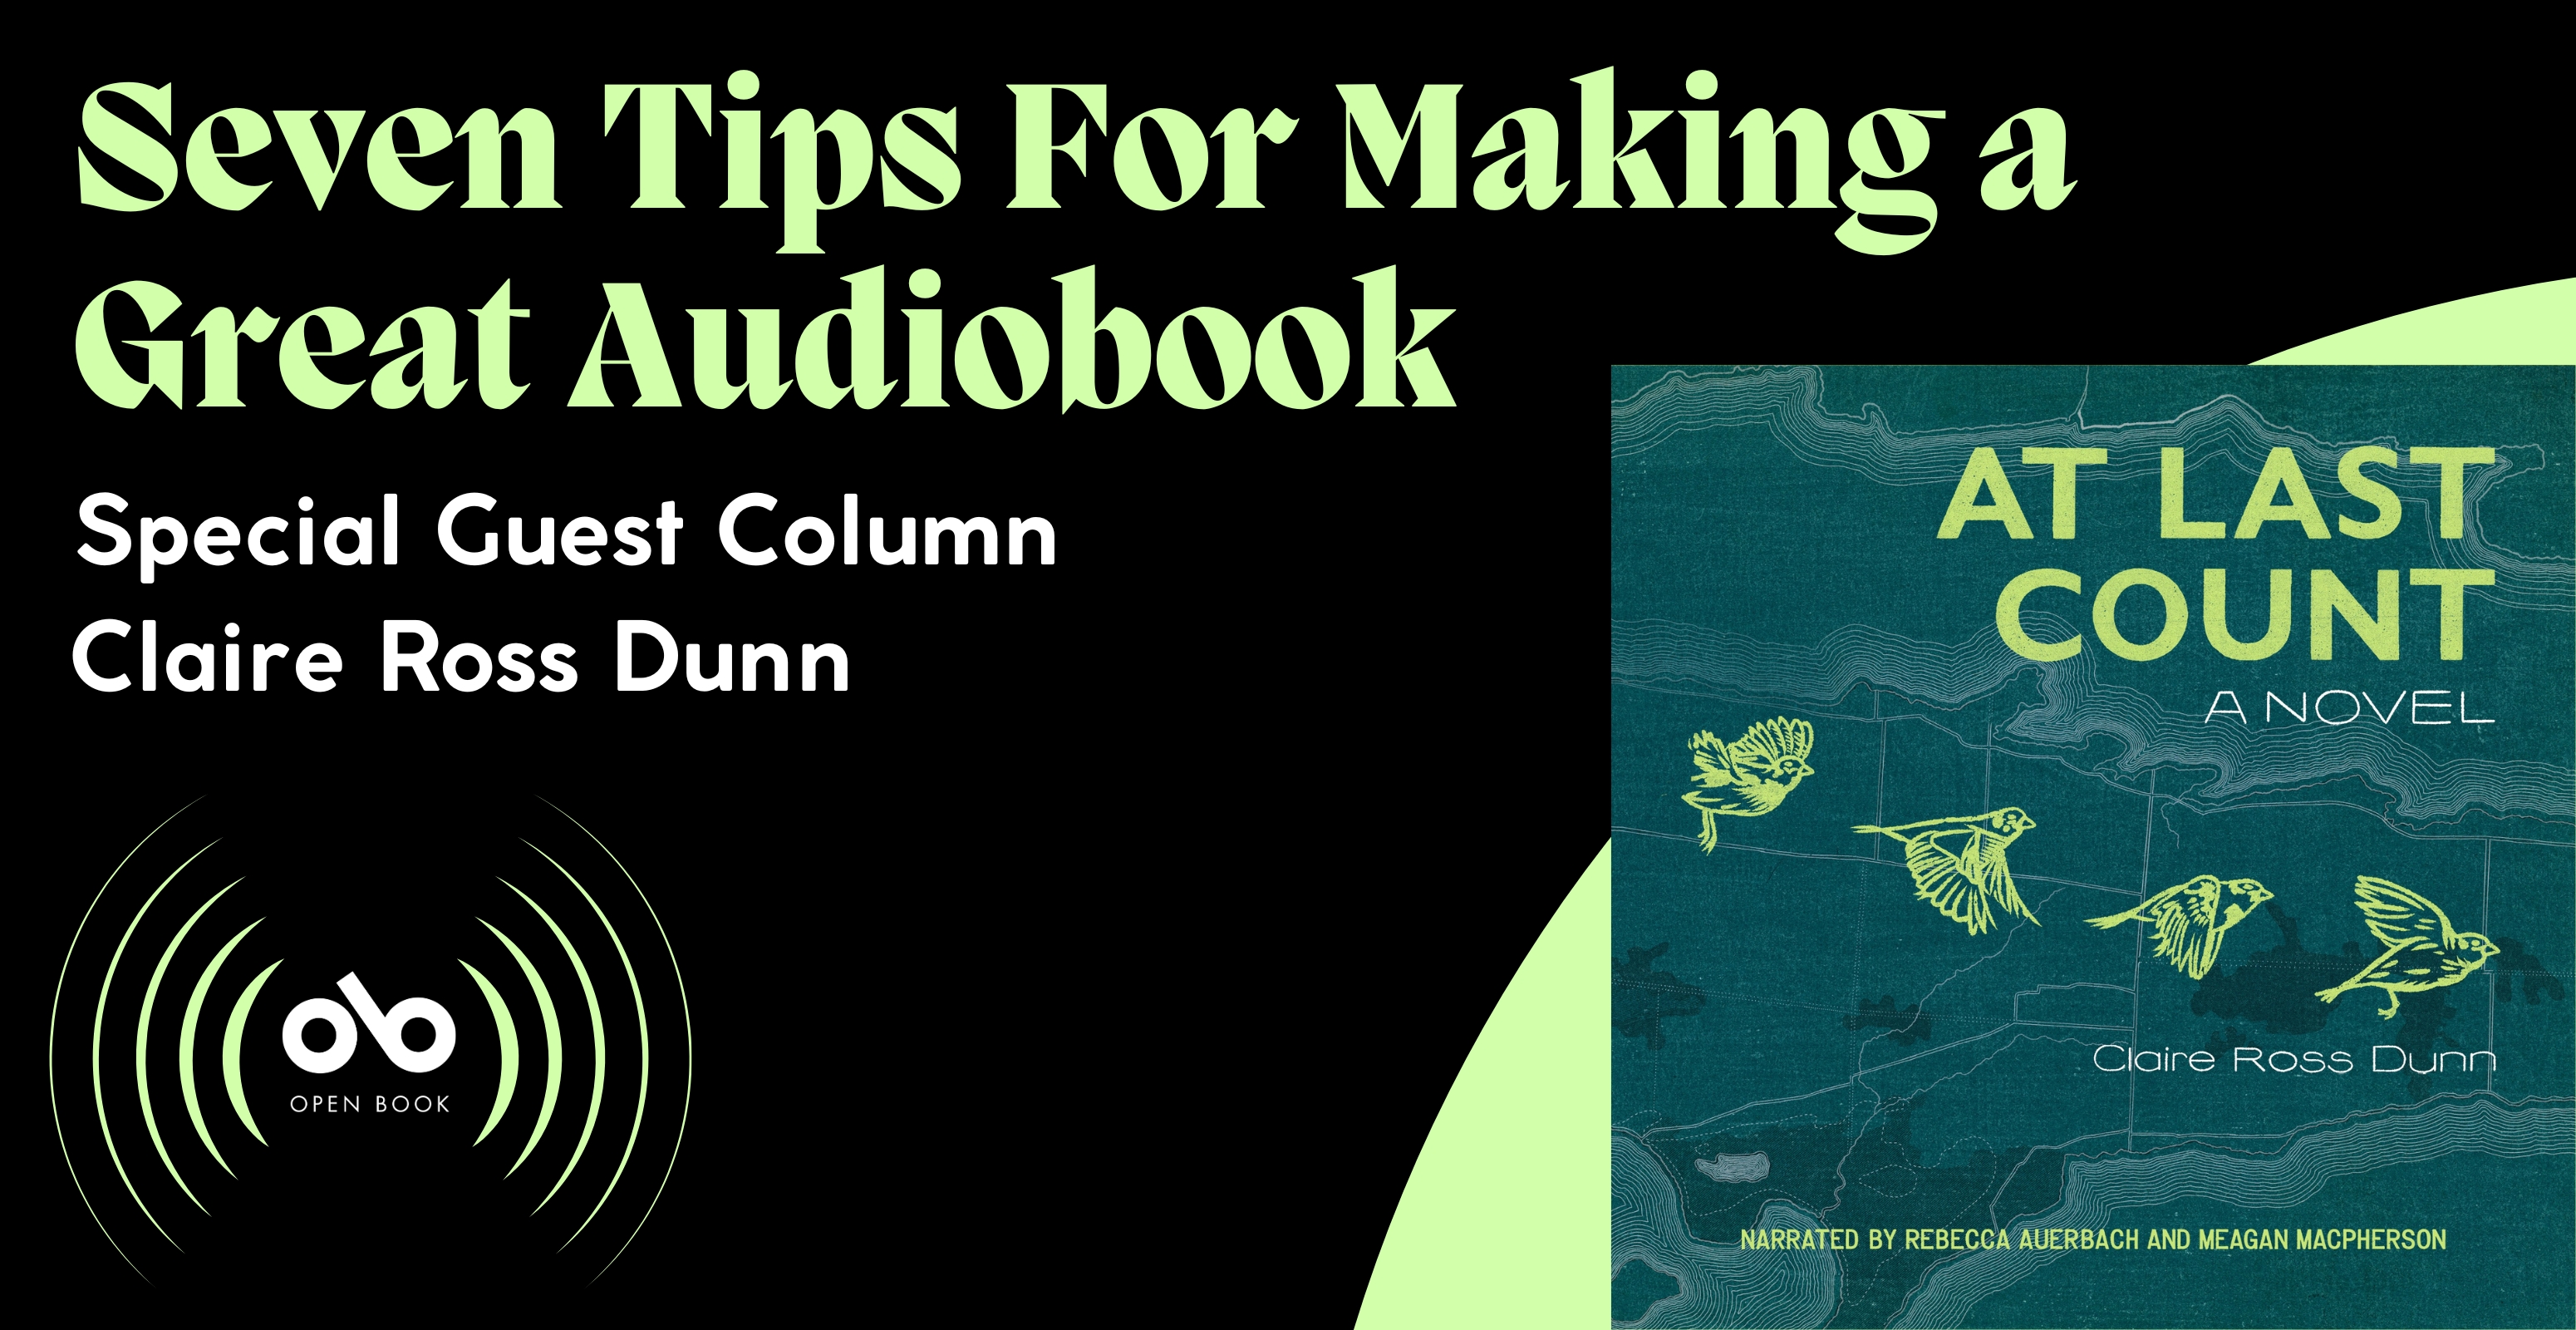 Seven Tips For Making a Great Audiobook